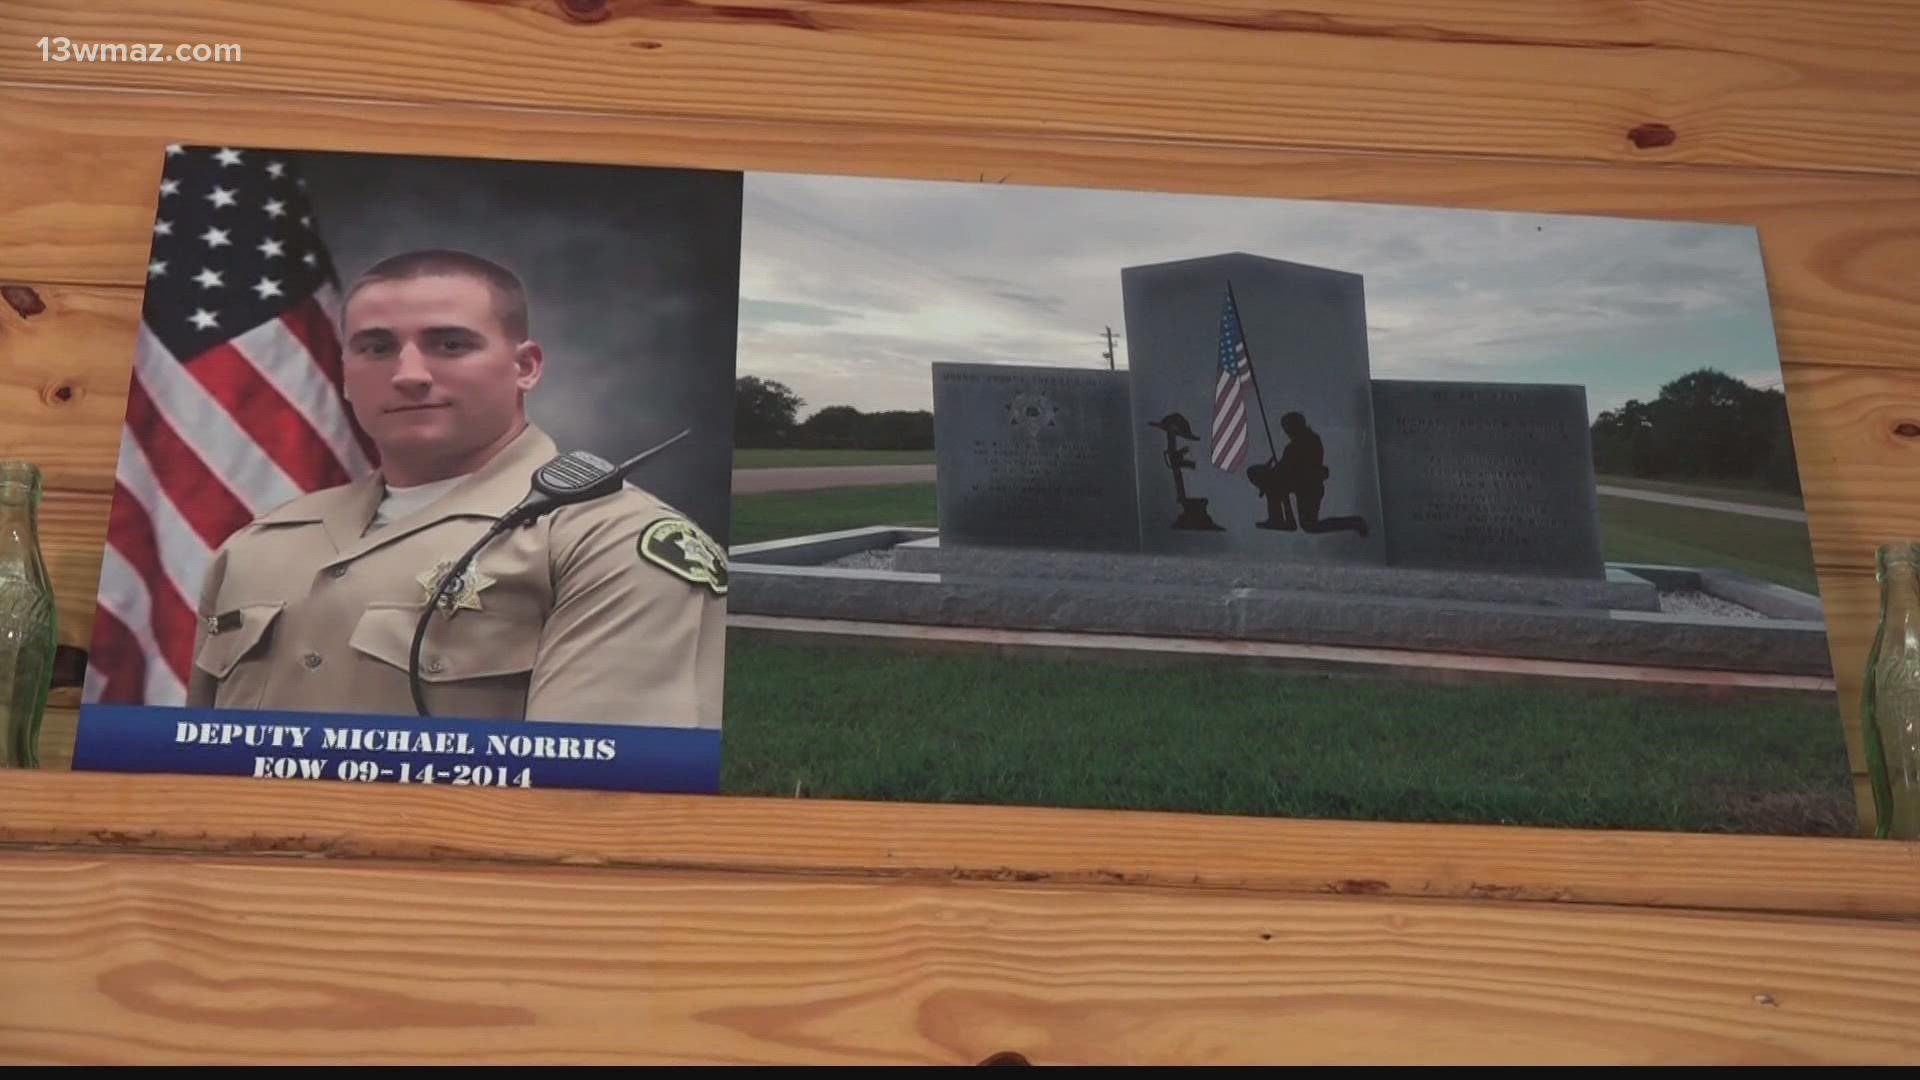 Deputy Michael Norris died in the line of duty responding to a call in 2014.